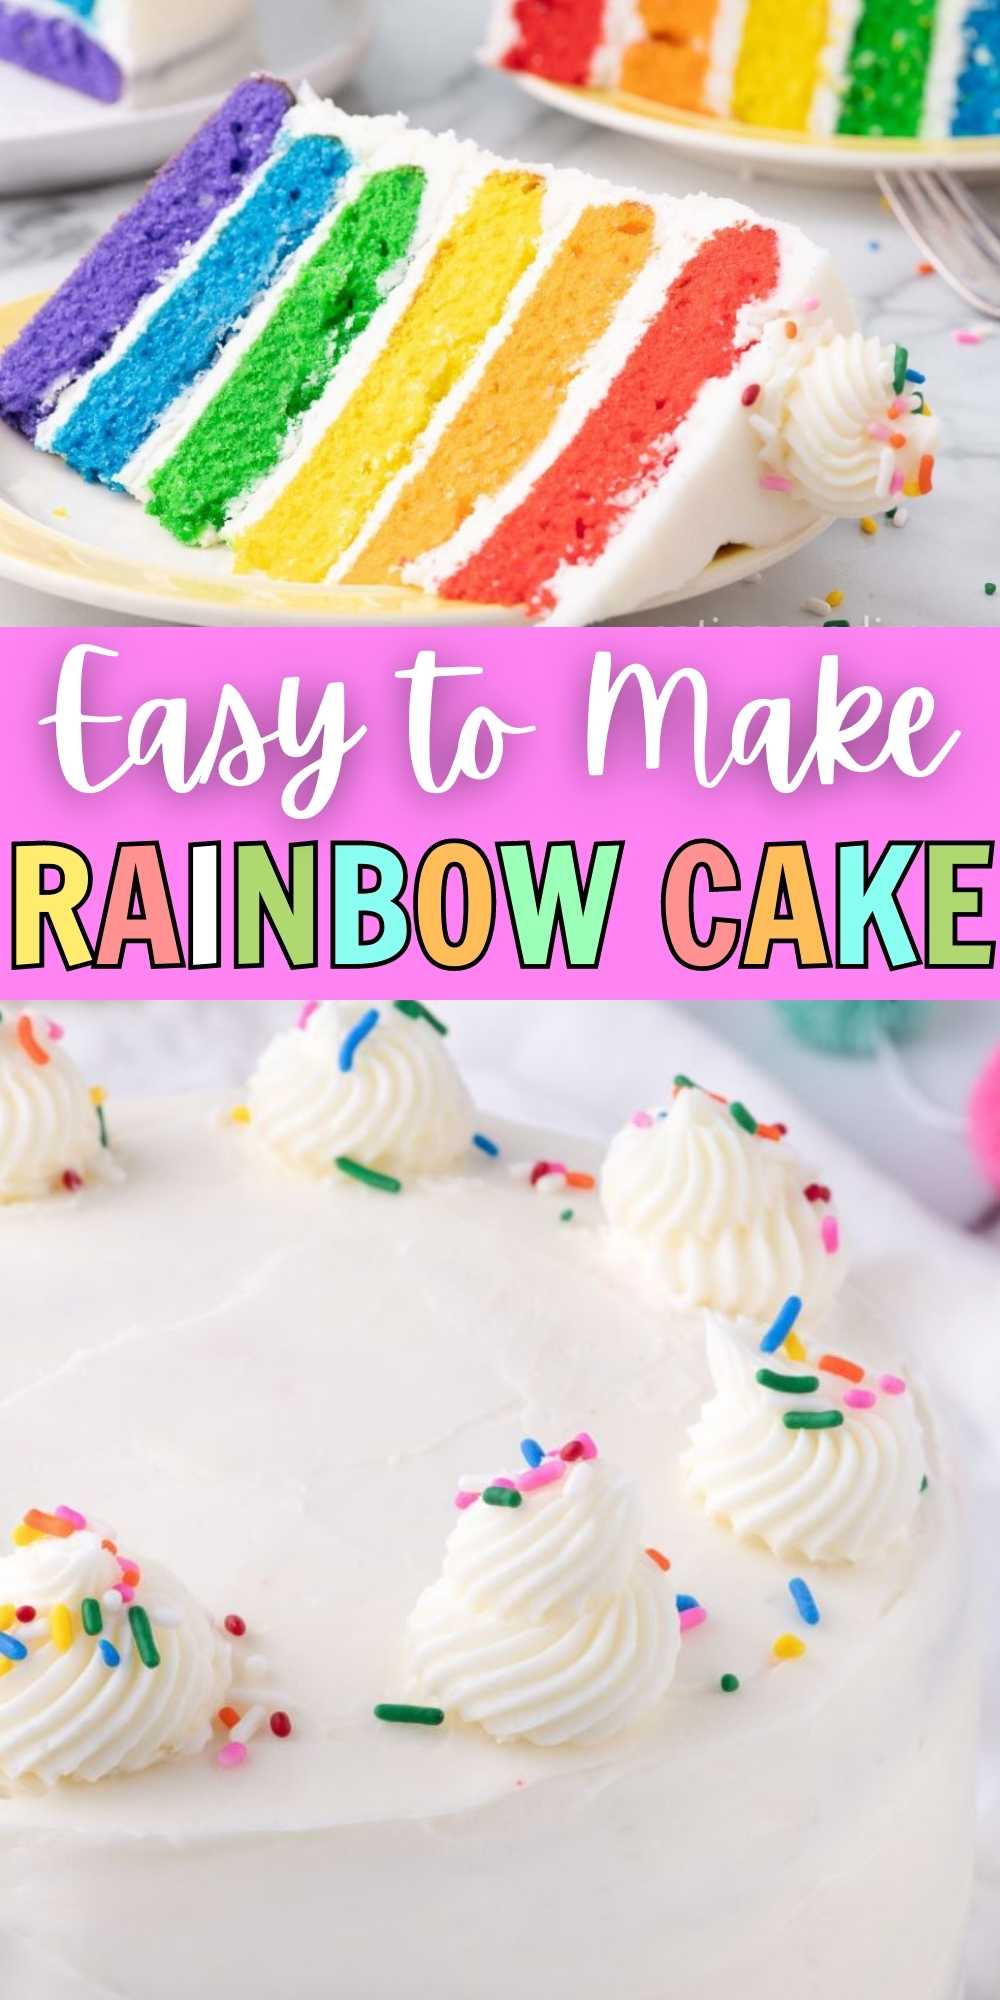 If you are looking for a fun cake to celebrate someone special, make this Rainbow Cake. The vibrant colors will make anyone smile. We always celebrate big for our kids birthday and I love making this cake for them. It is fun, festive and all the fun colors makes for a memorable birthday. #eatingonadime #rainbowcake #rainbowdesserts